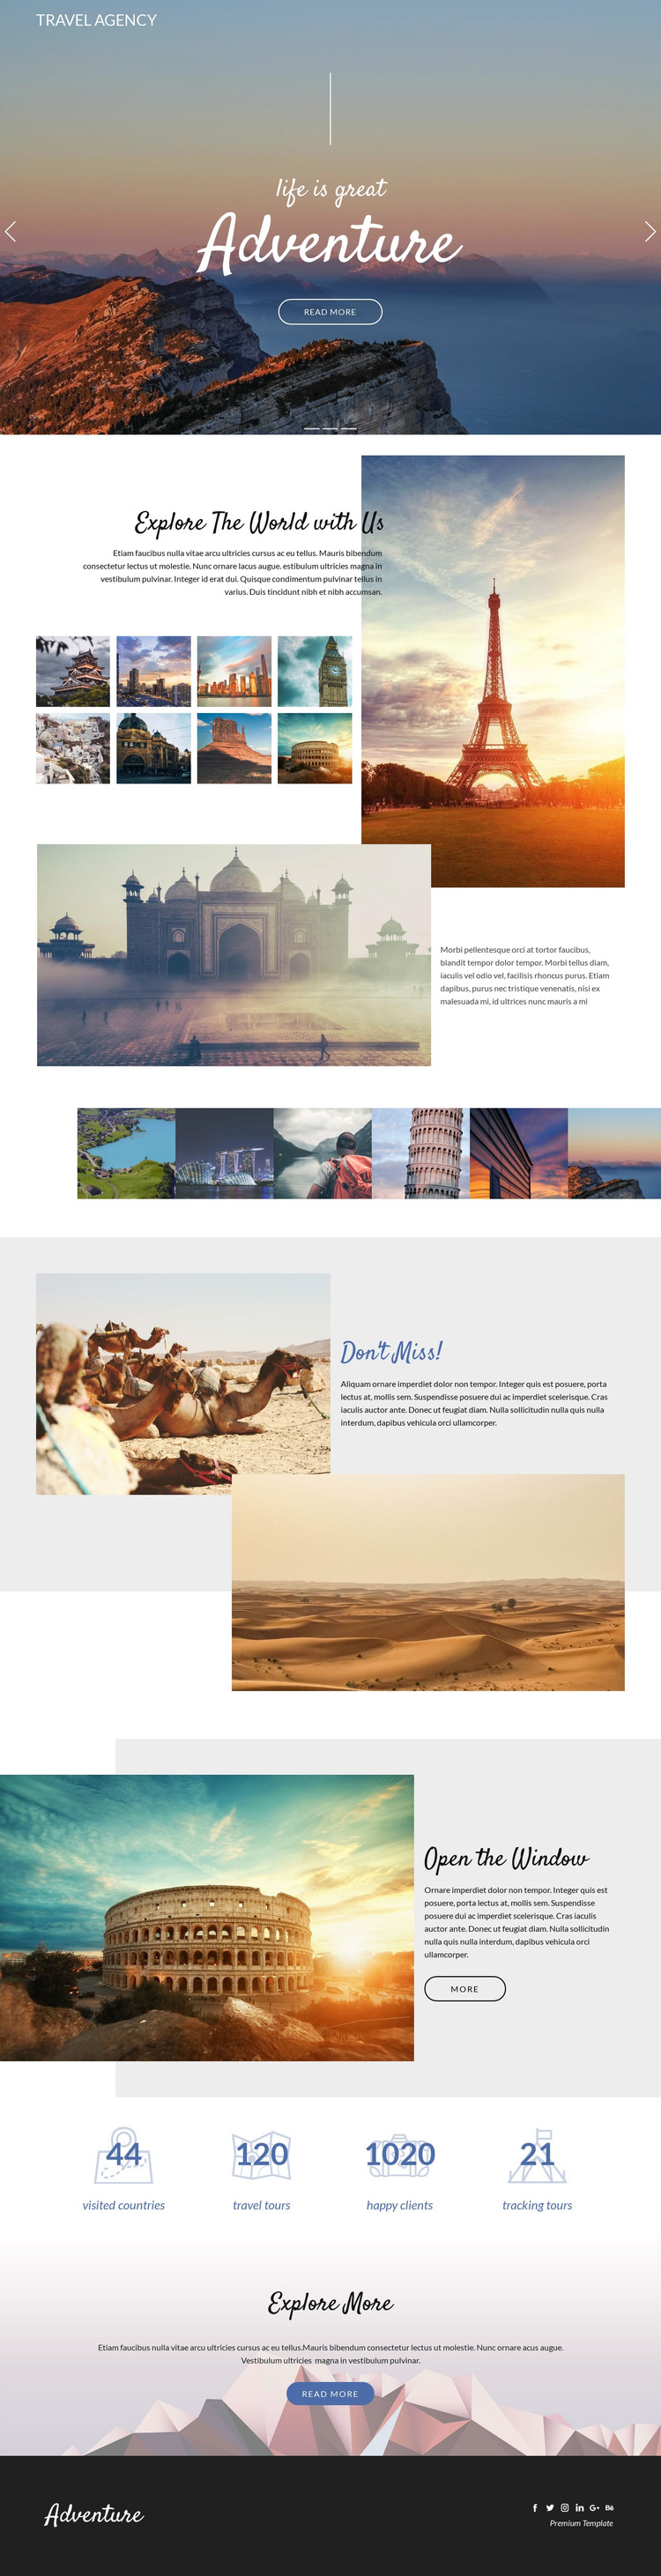 Adventure and travel Homepage Design